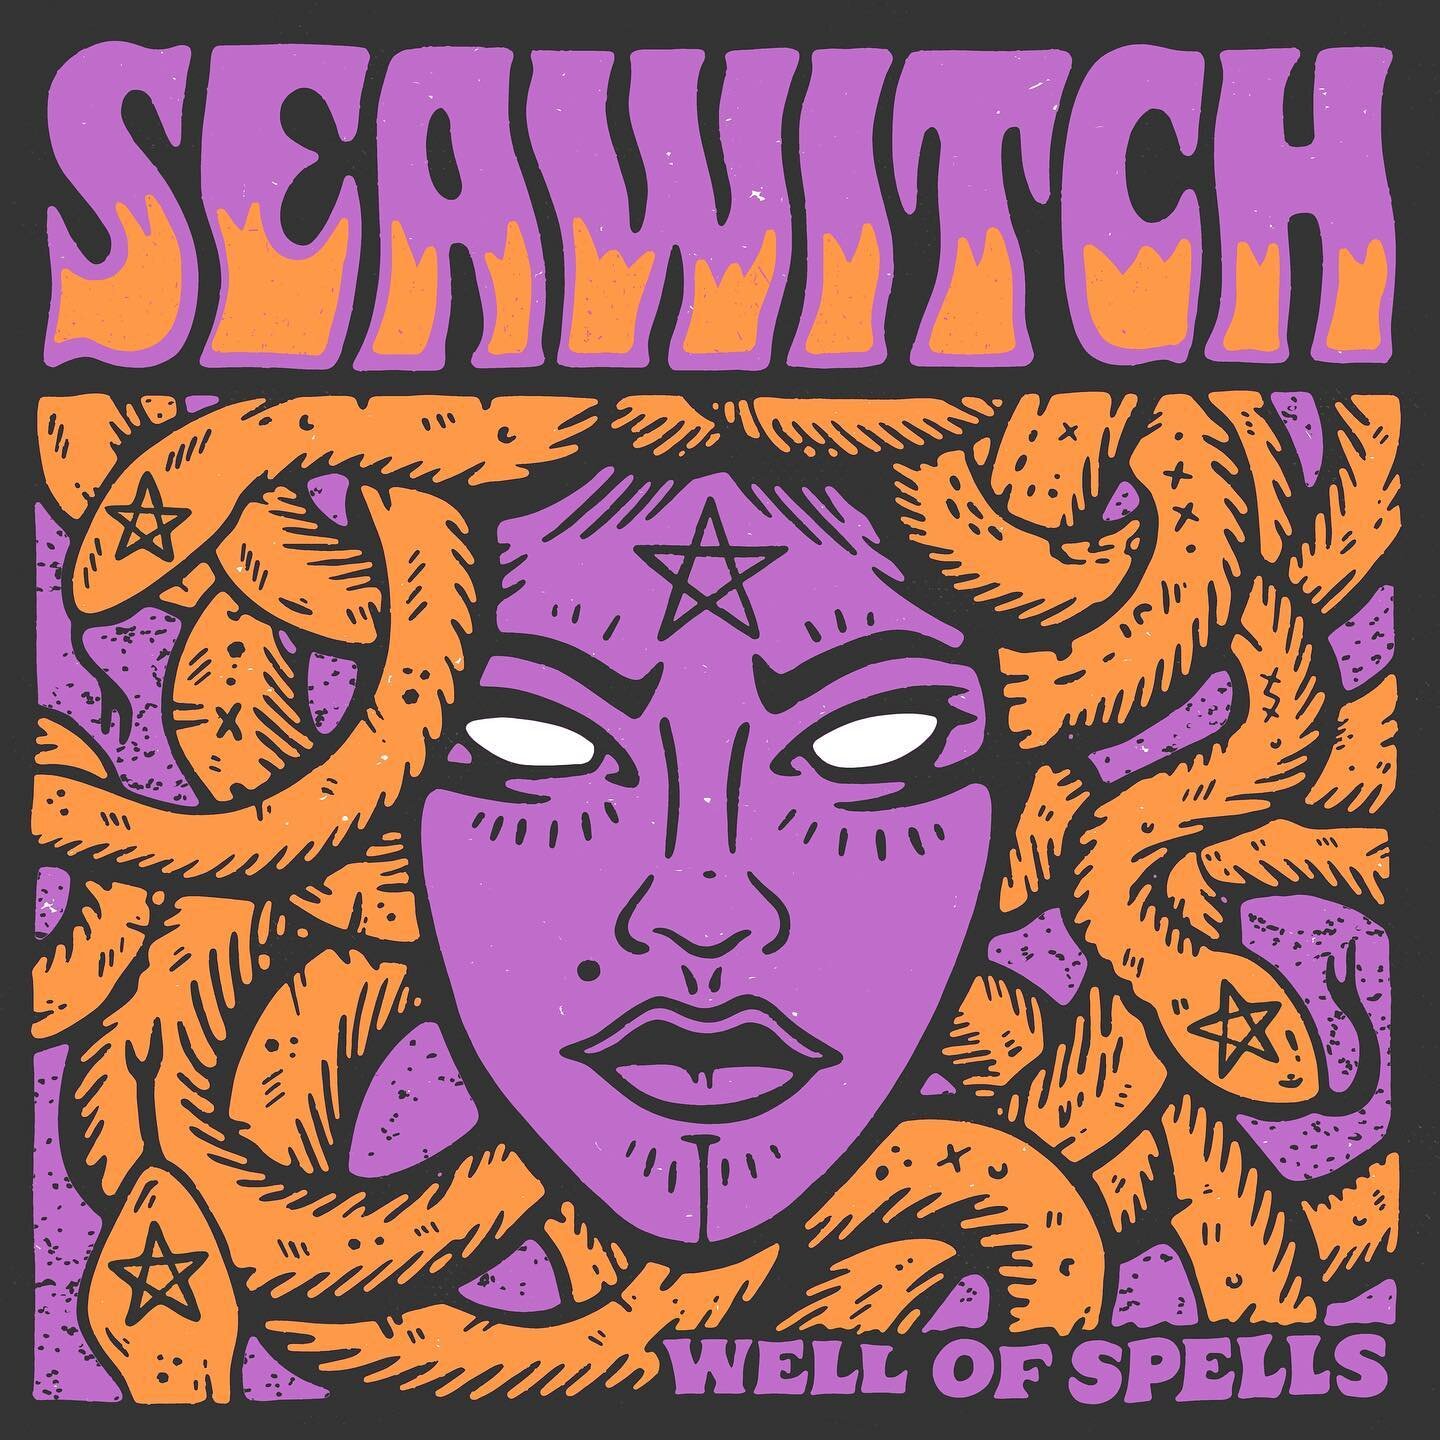 Cover artwork for @seawitchtheband&rsquo;s debut album WELL OF SPELLS. Was a pleasure working with @captainfifi of Def FX and @spiff._ of The Hellmenn on this one.
For now the single WITCHES FOREVER is up and out. The full album is available on purpl